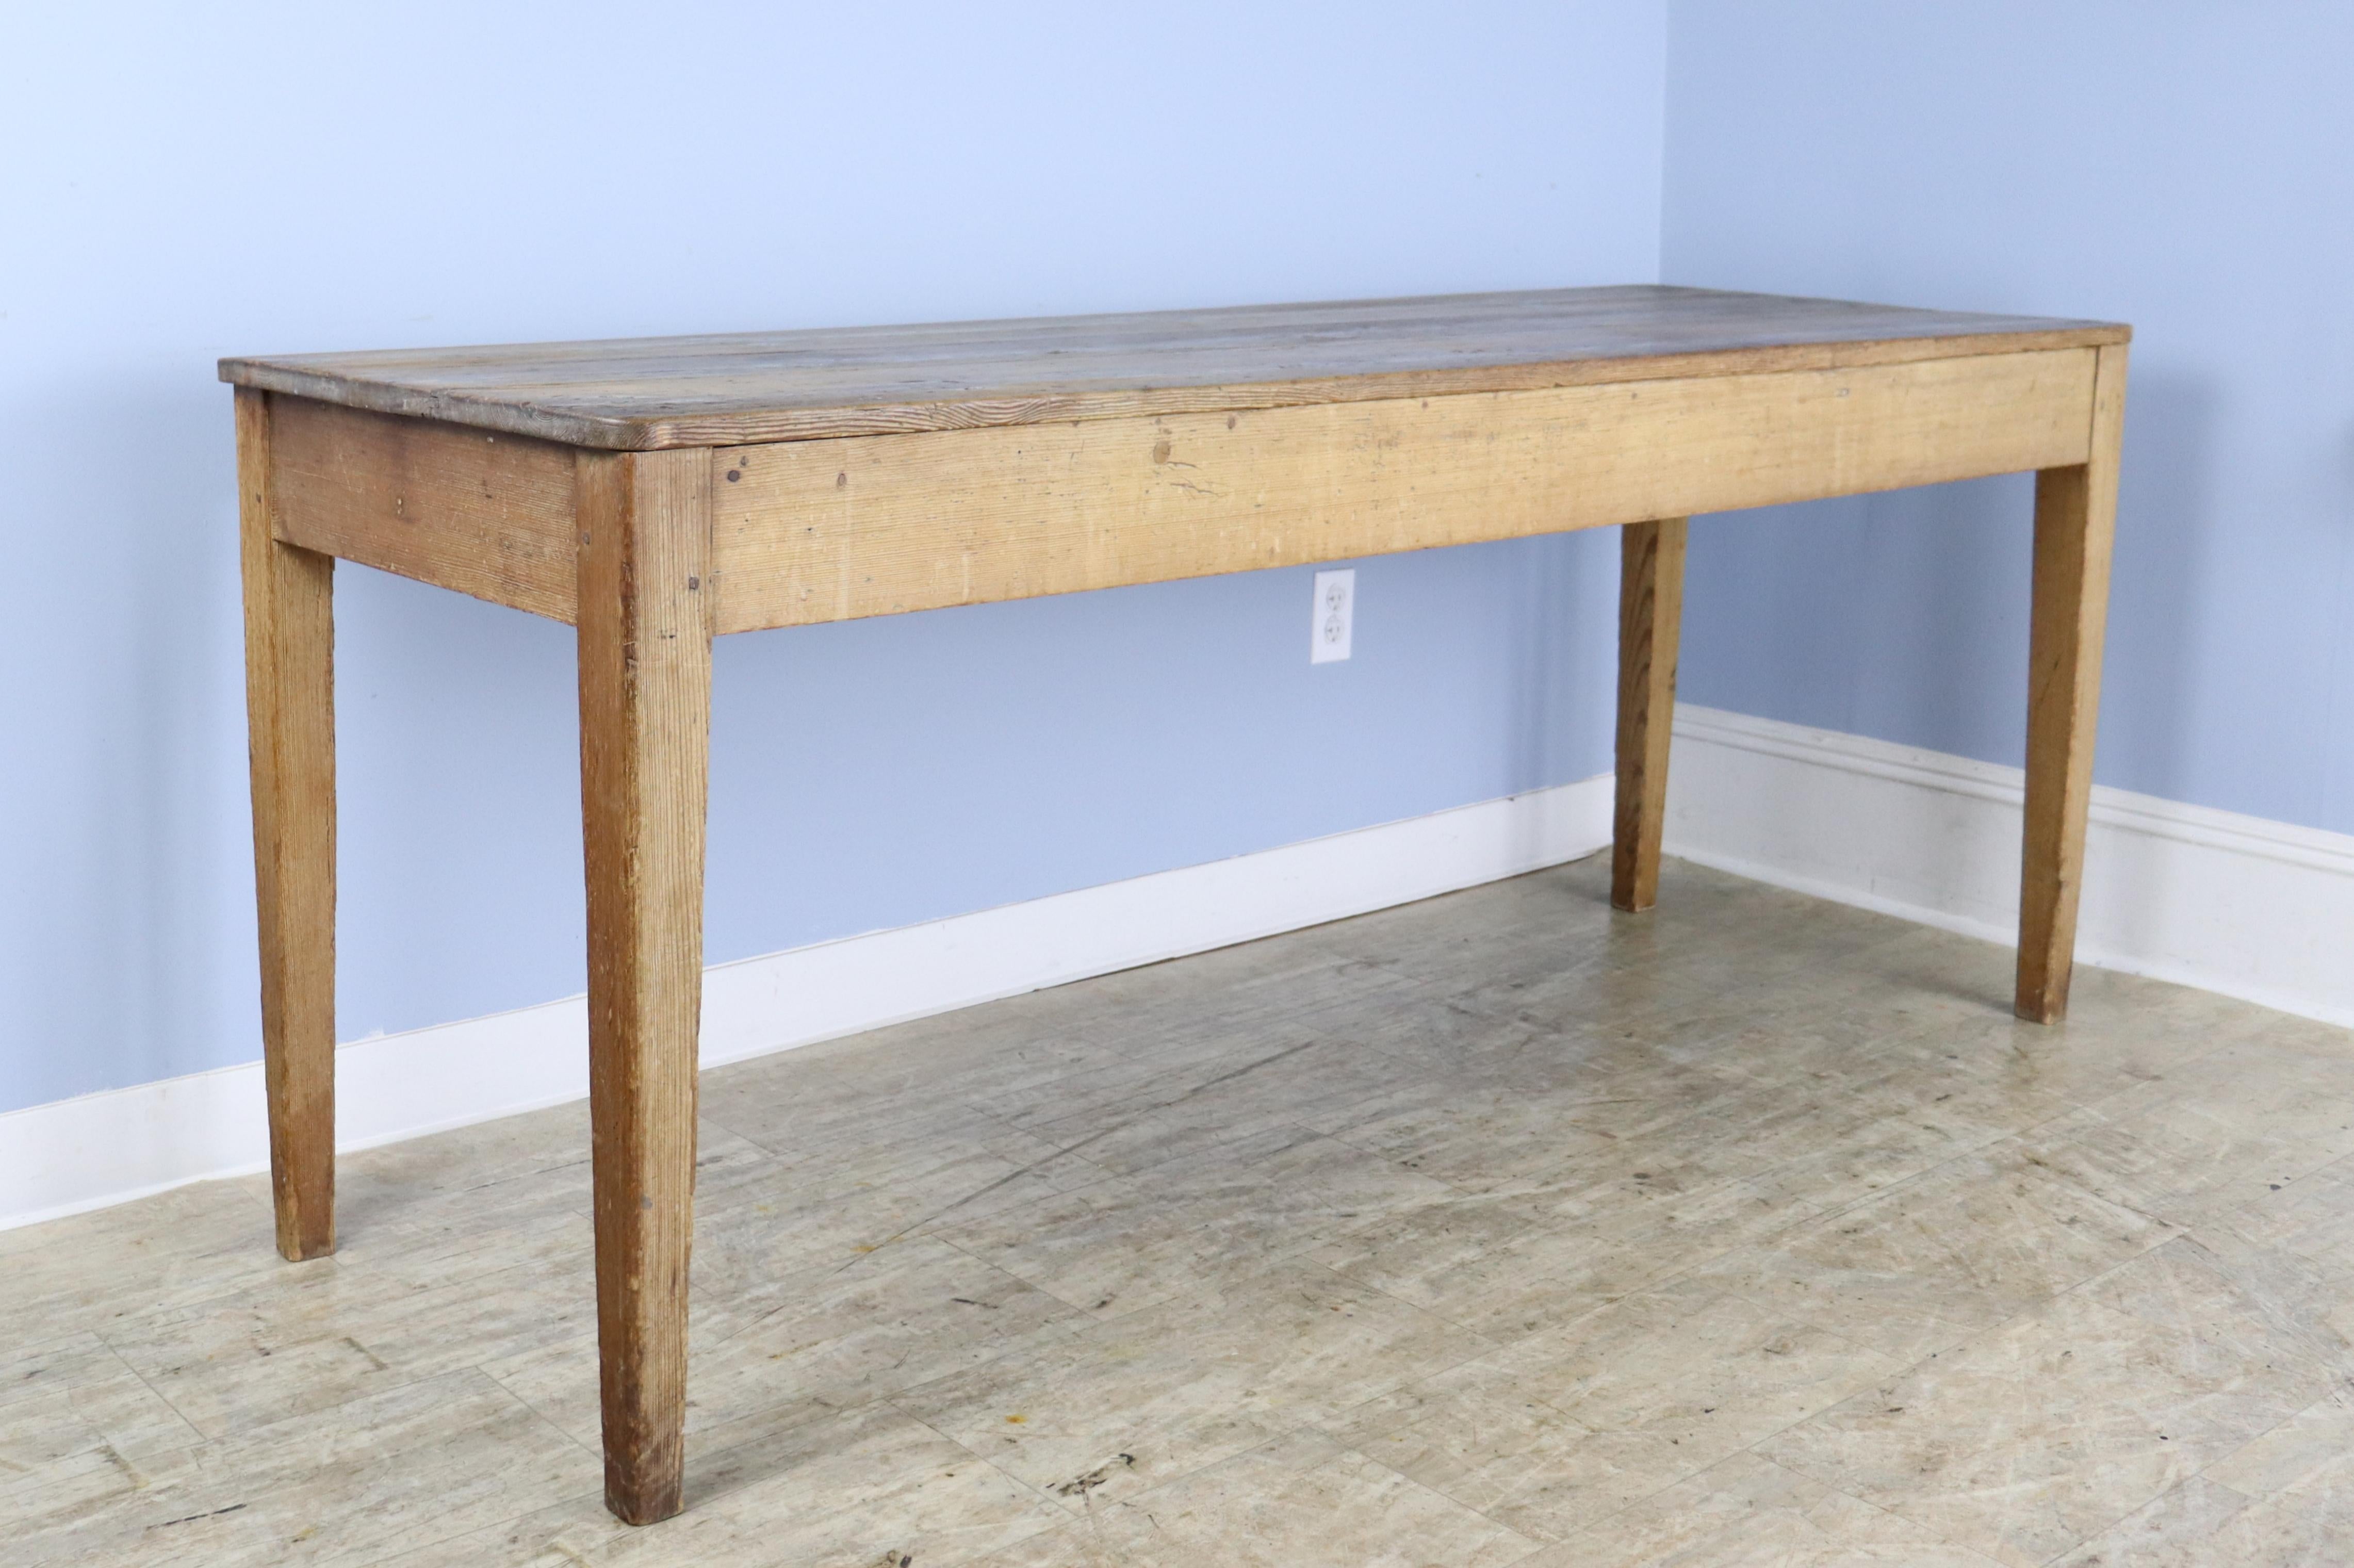 A narrow light pine farm table with good pine grain and a classic silhouette.  Legs are nicely pegged at the apron.  The apron height of 25 inches is good for knees, and there are 70.5 inches between the legs on the long side.